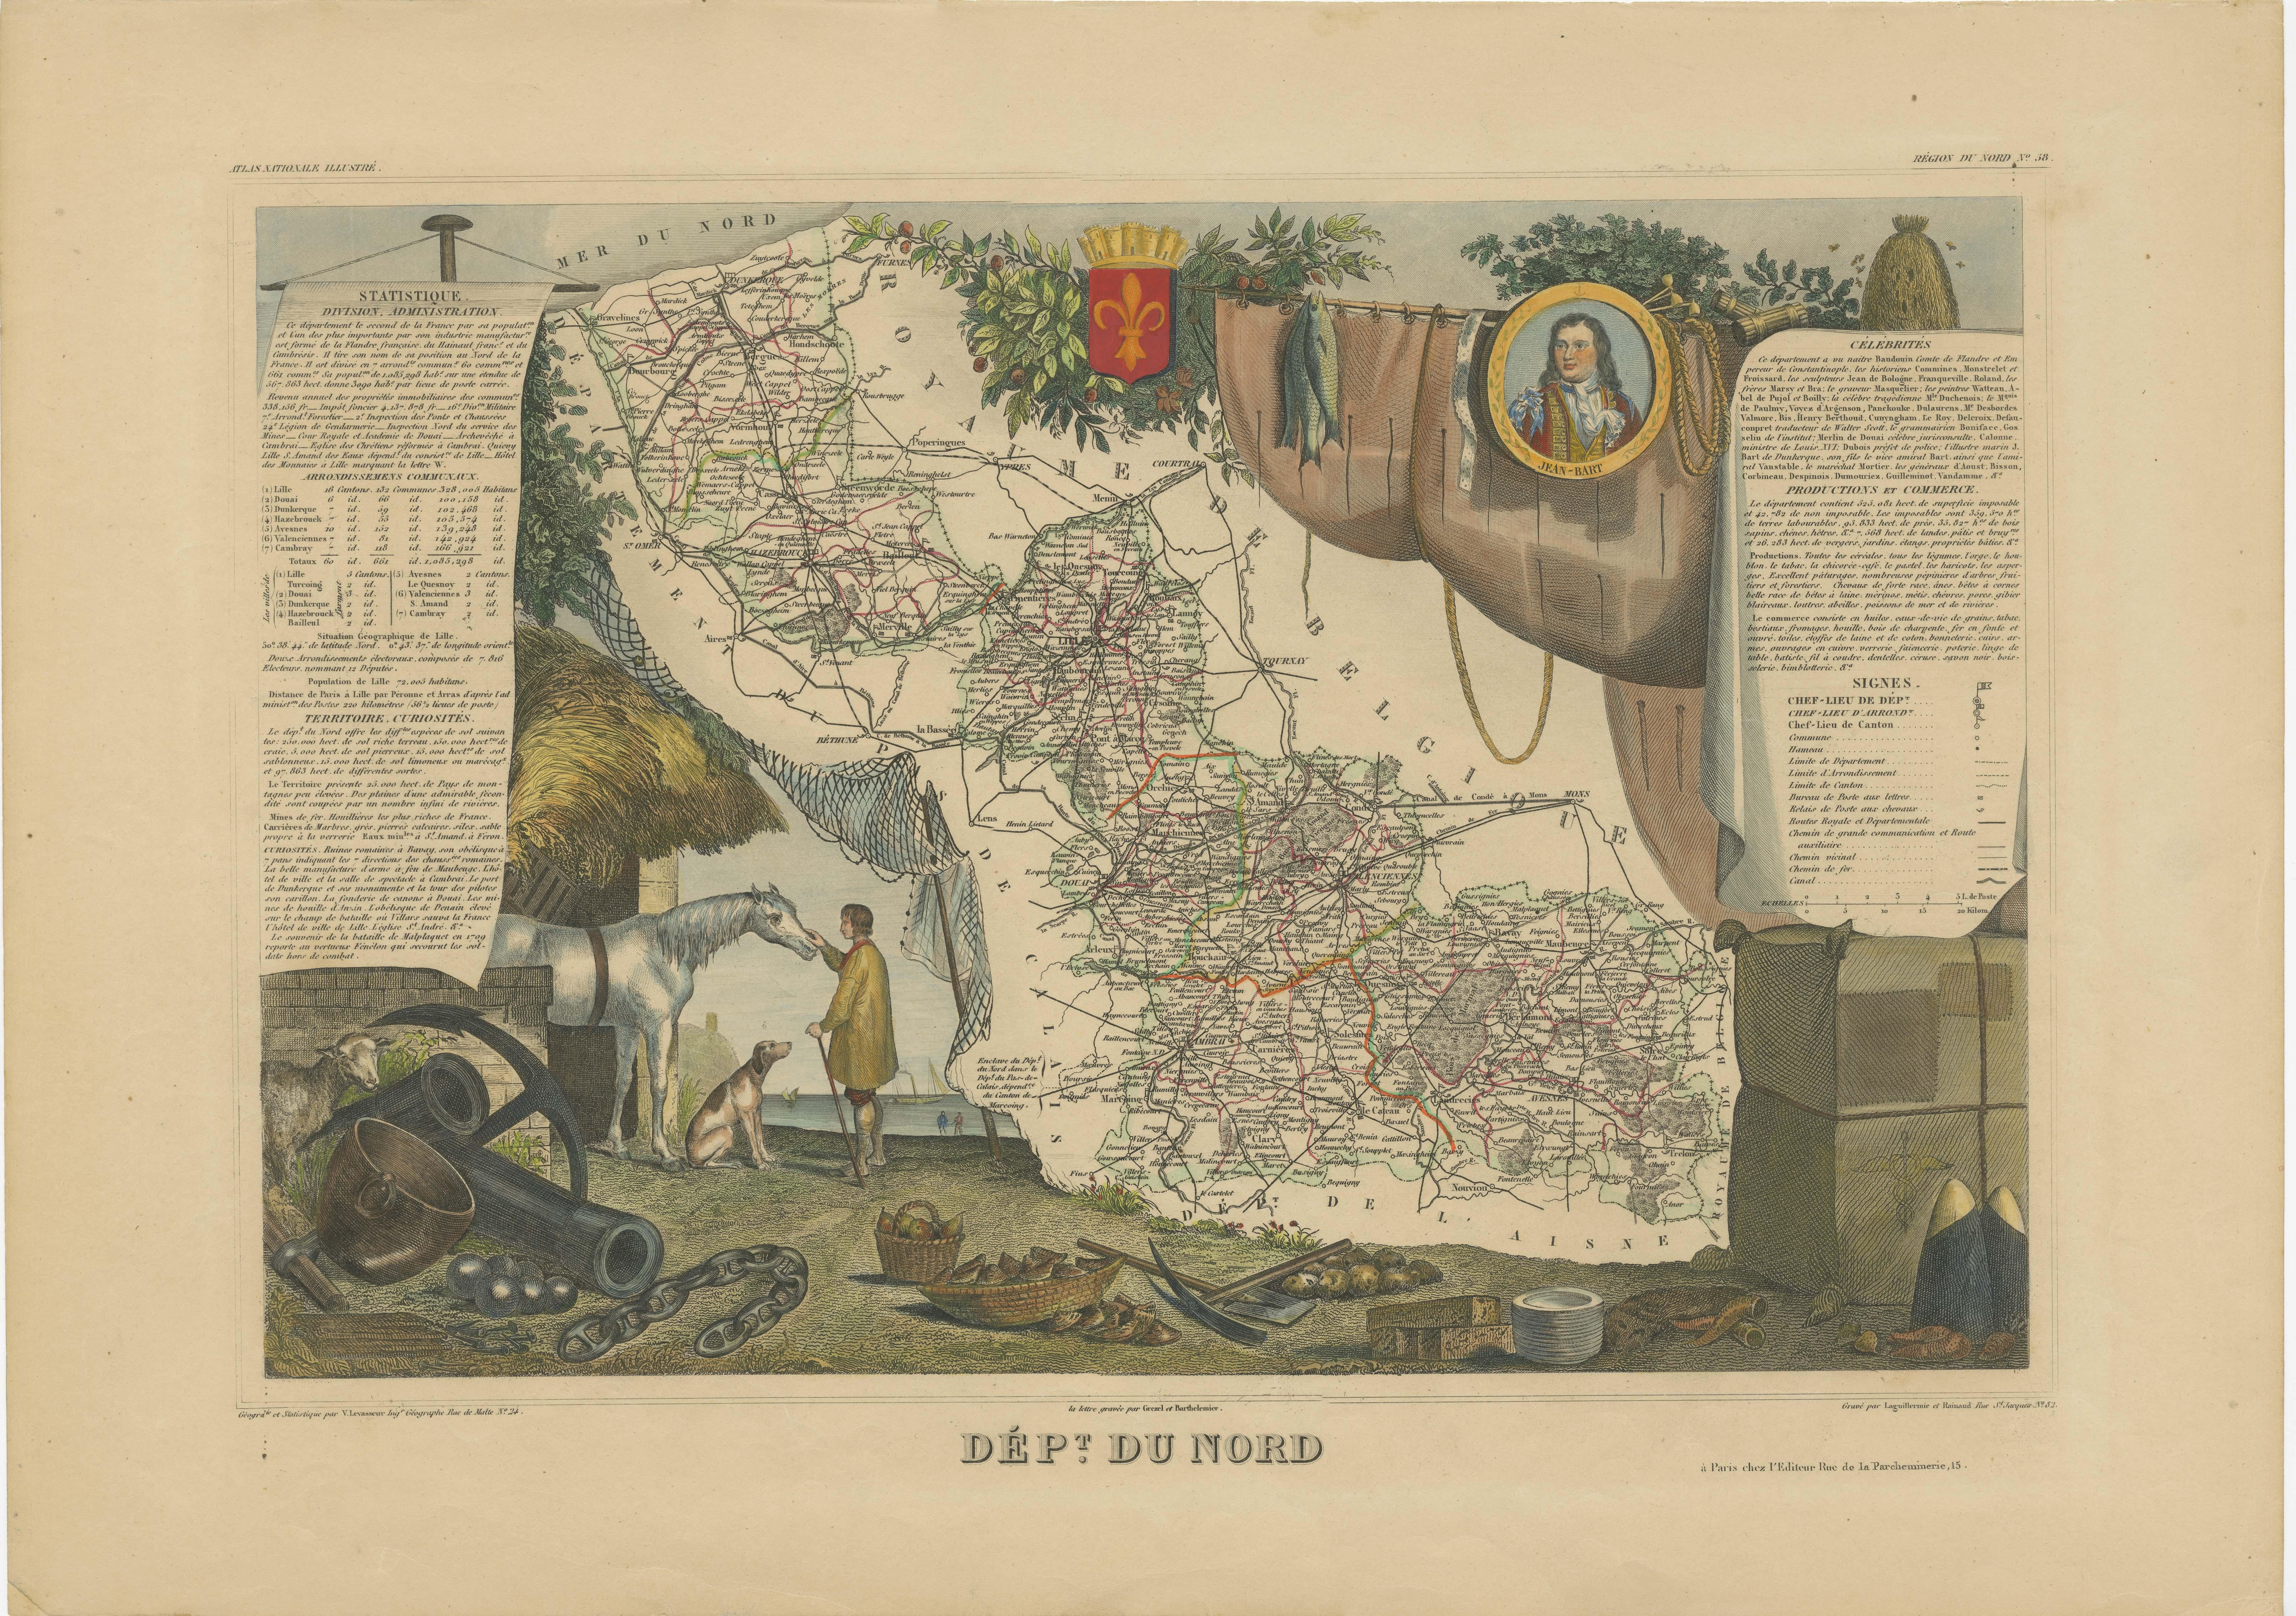 Antique map titled 'Dept. du Nord'. Map of the French department of Nord, France. This area is known for its production of Maroilles, a cow's milk cheese. This cheese is produced in rectangular blocks with a moist orange-red washed rind and a